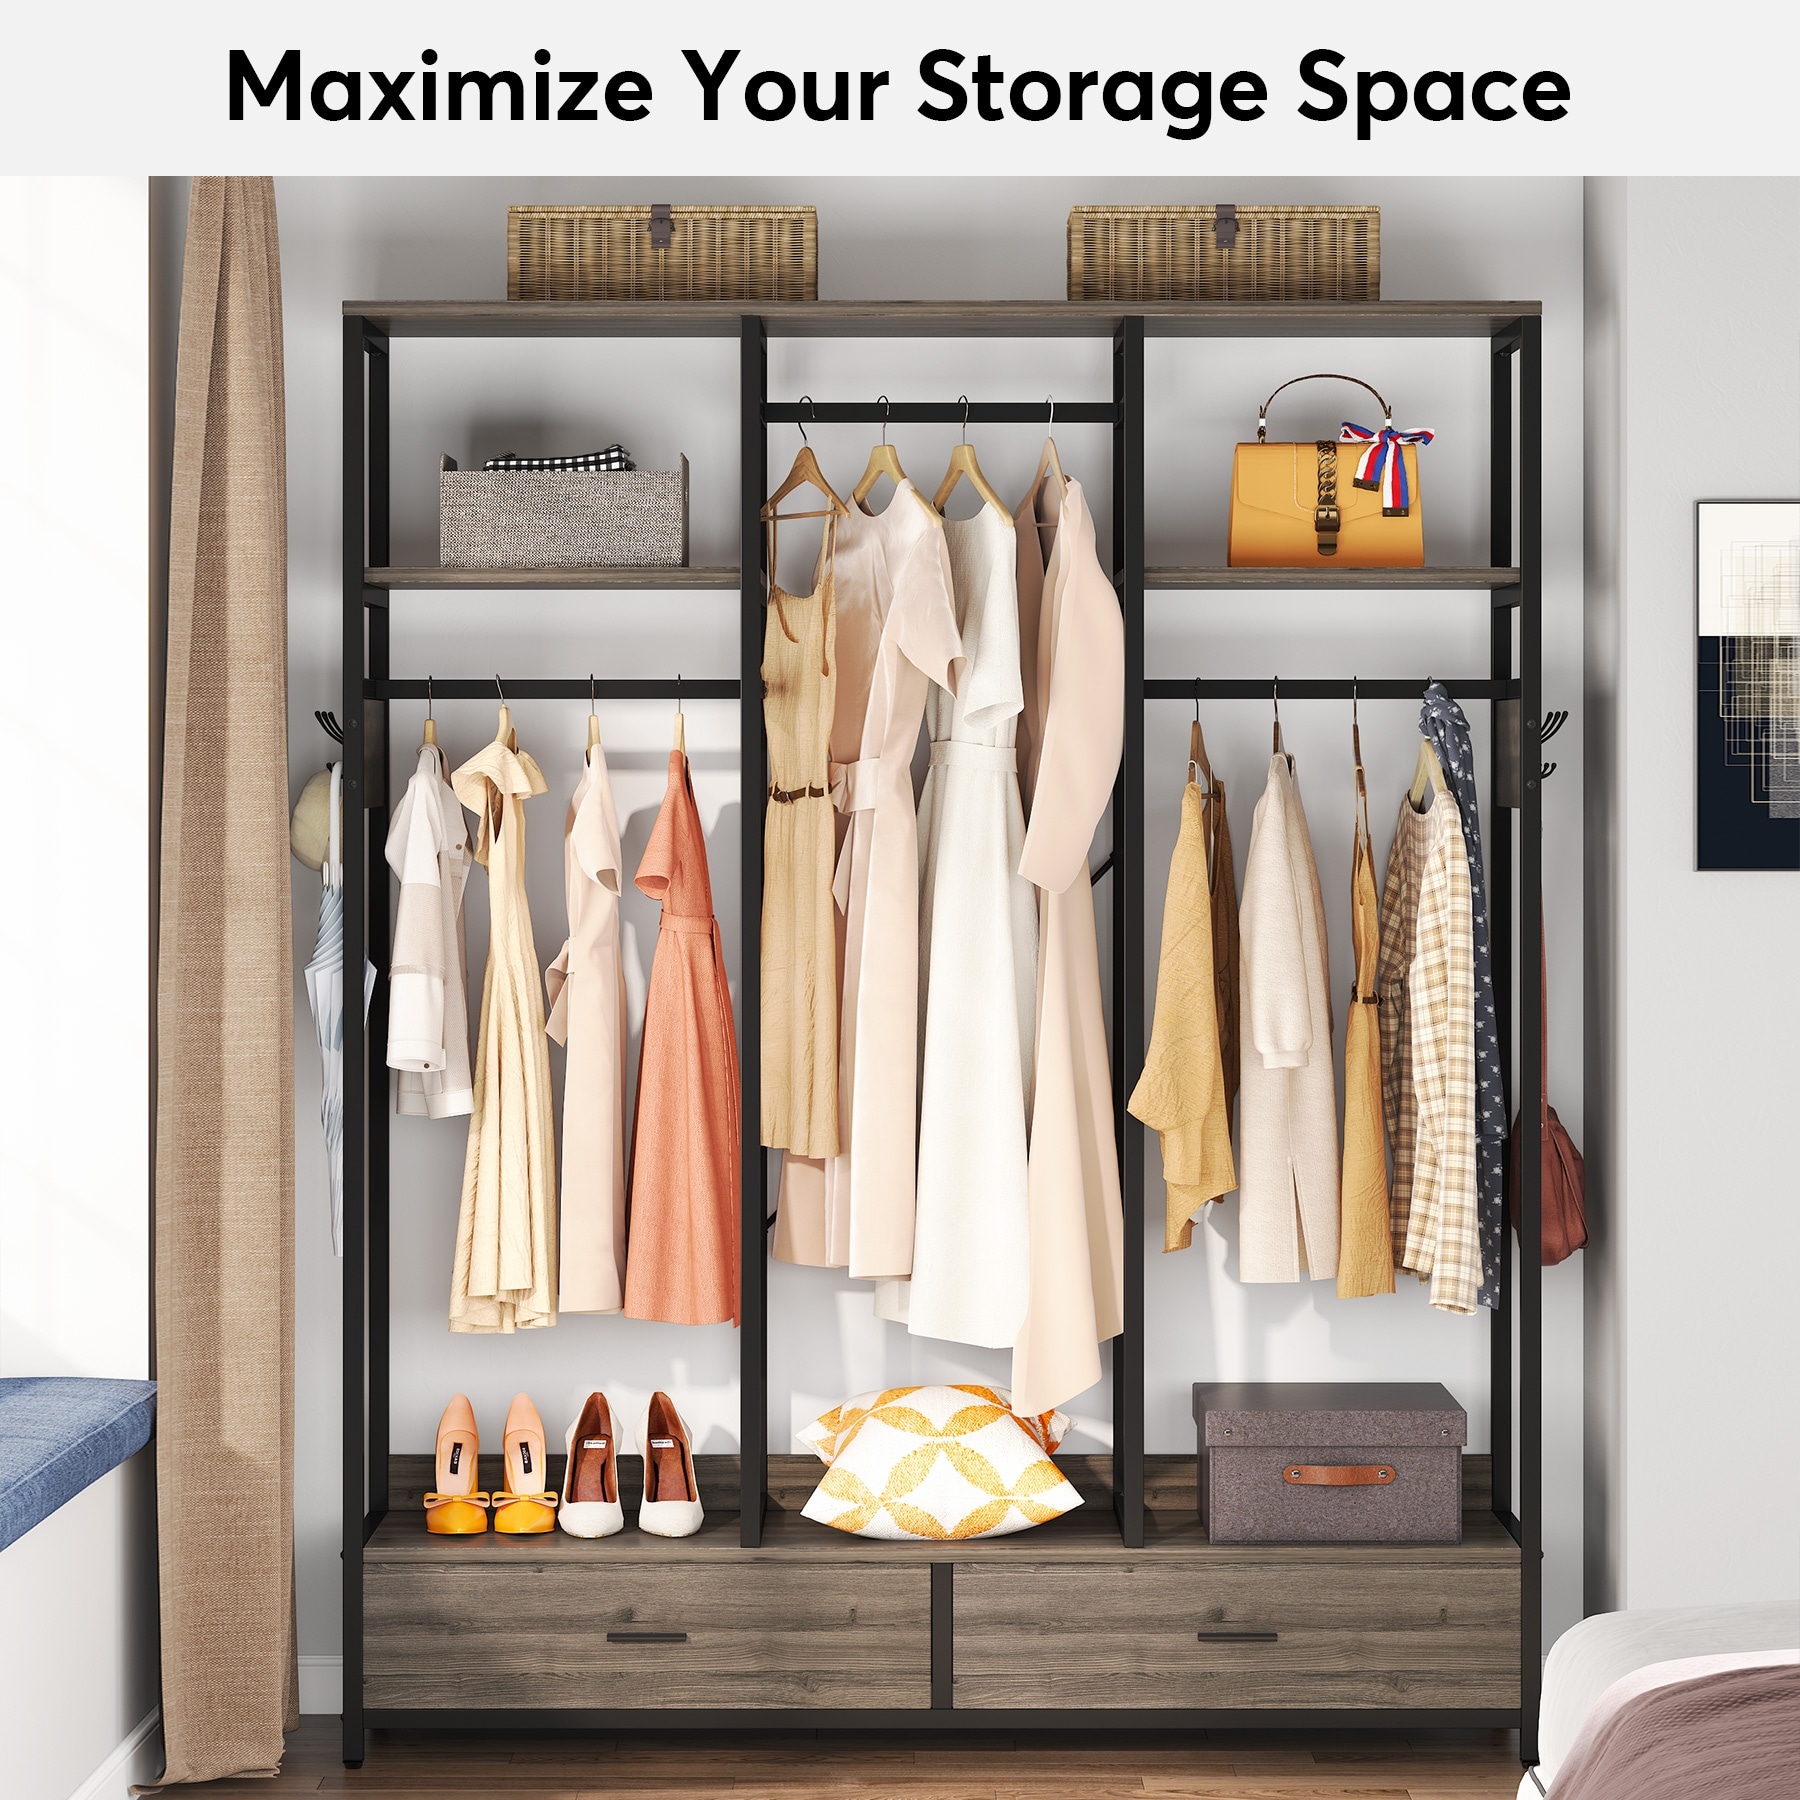 https://ak1.ostkcdn.com/images/products/is/images/direct/dfe475d4203818bfd1f20342d20785dd78ad735c/Freestanding-Closet-Organizer-with-Drawers-and-Hanging-Rod-Clothes-Garment-Rack-Organizer.jpg